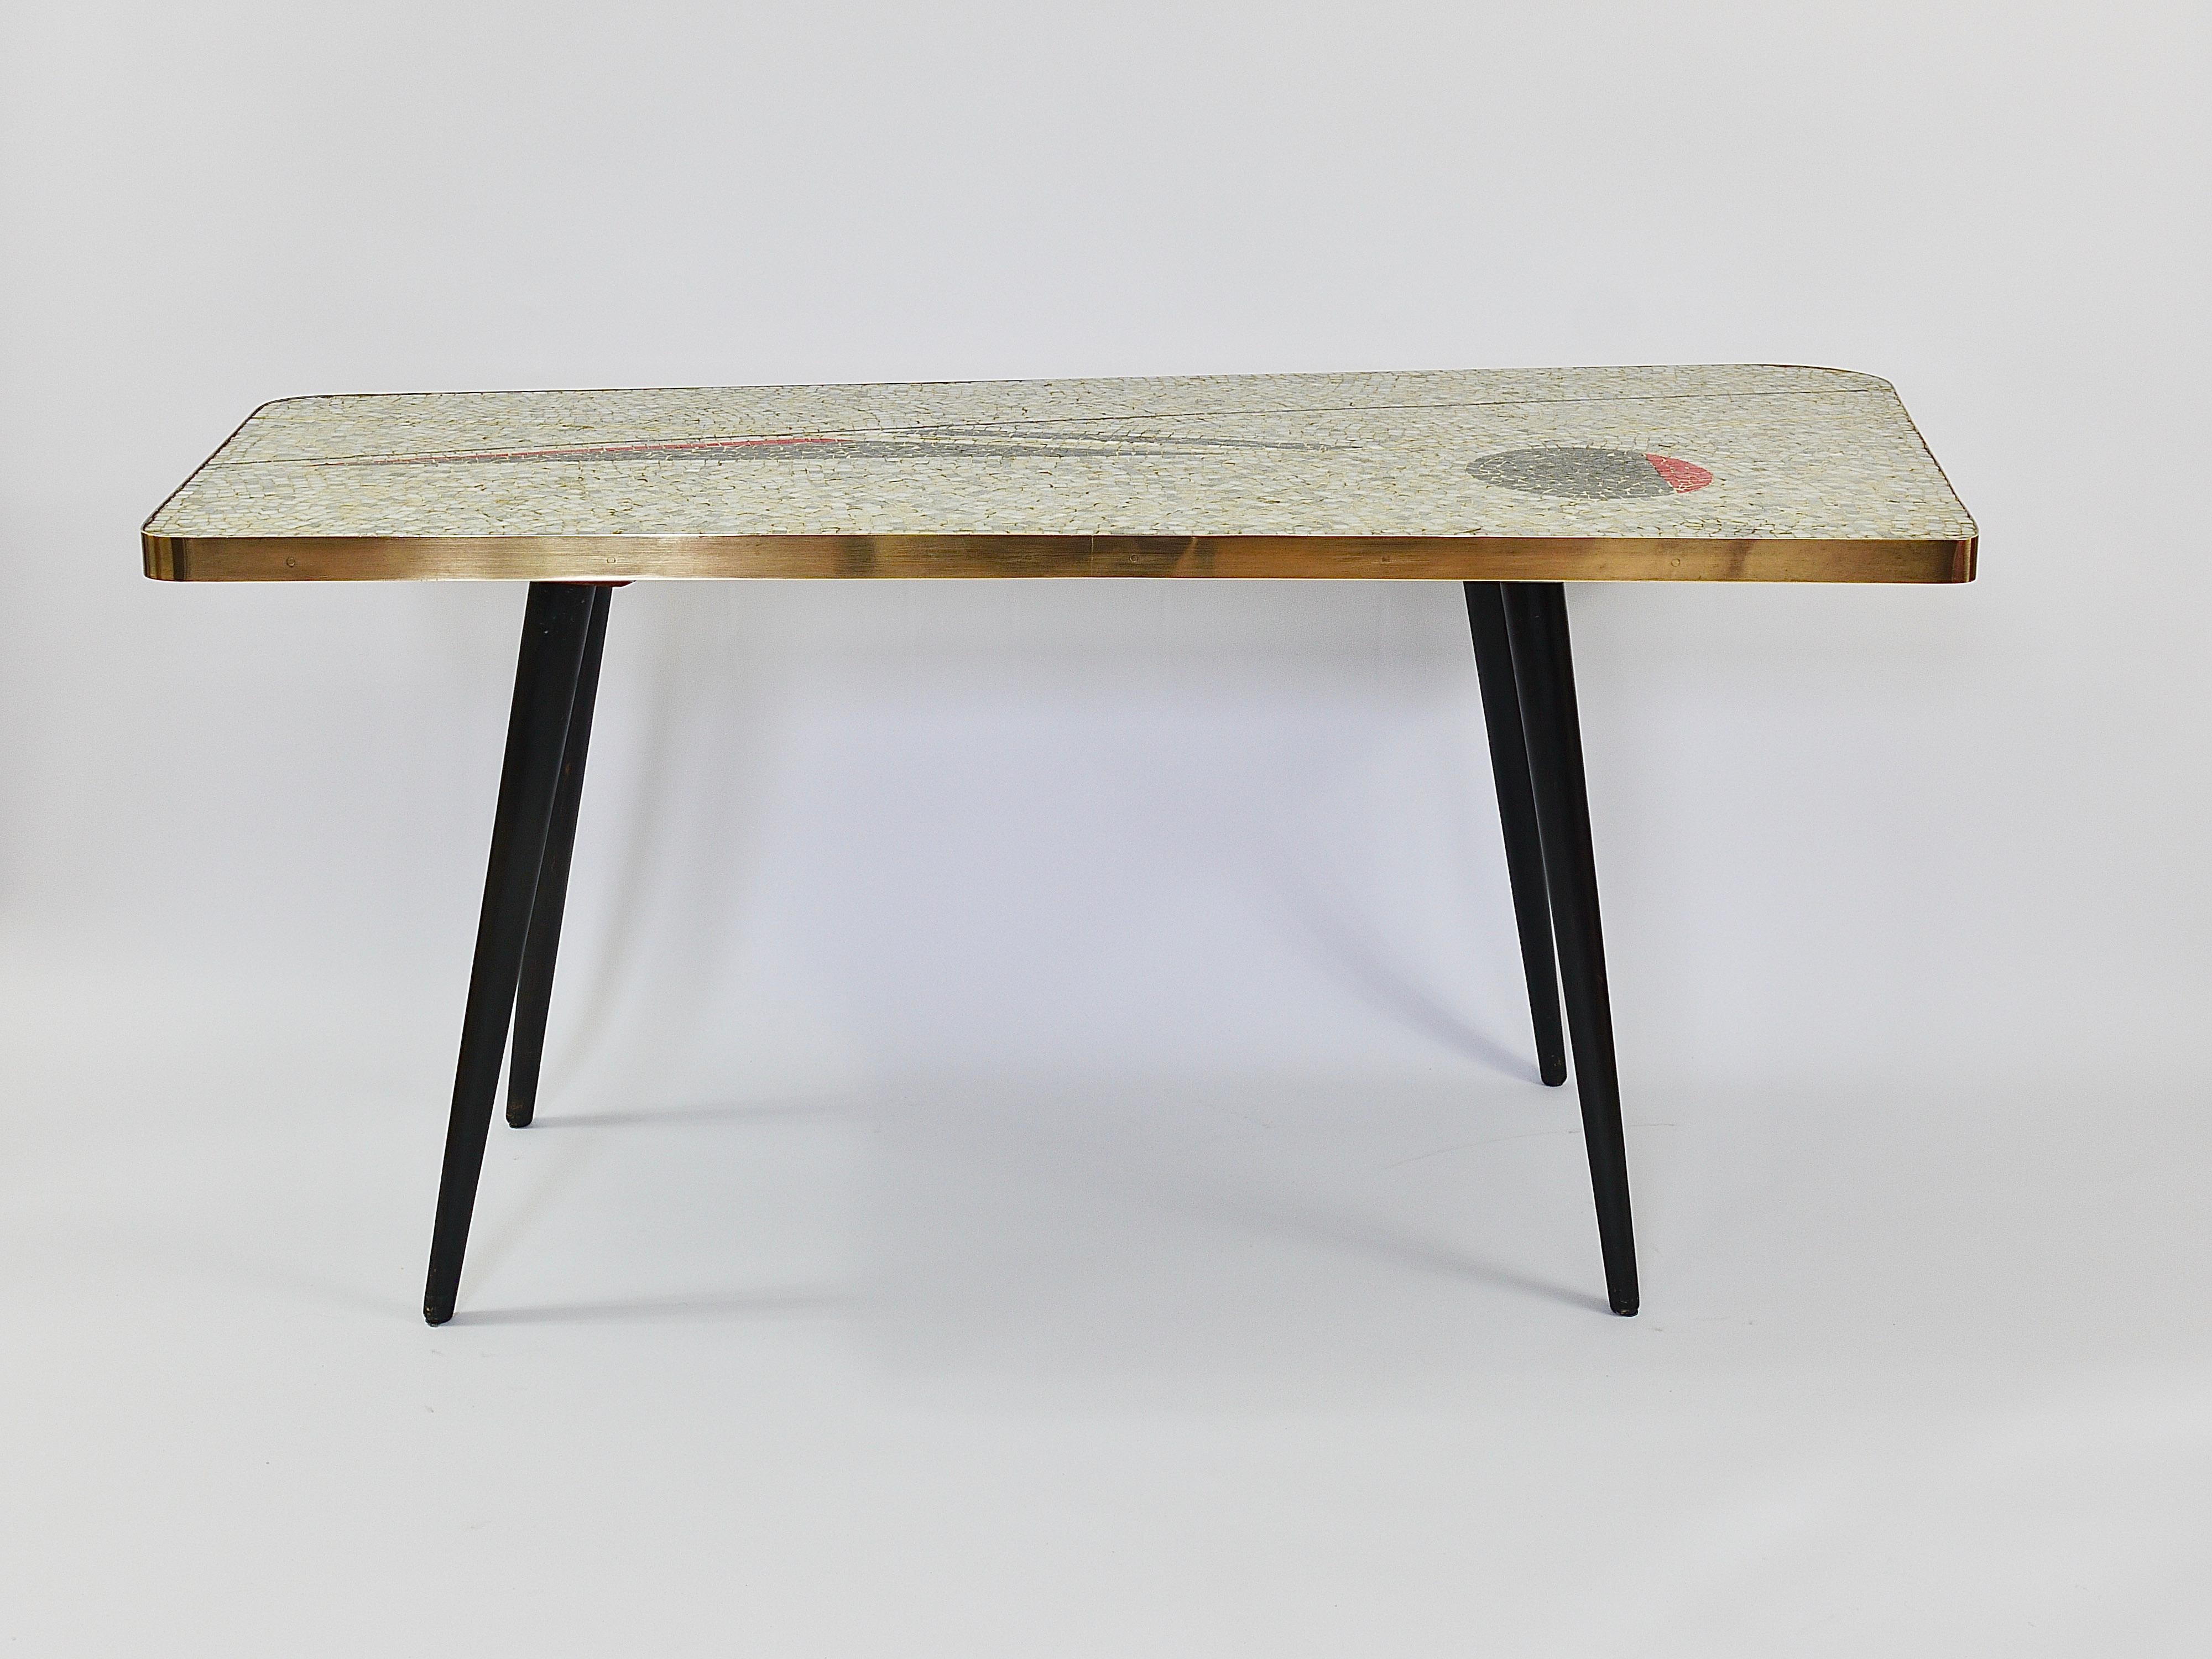 Berthold Muller Asymmetrical Mosaic Tile Coffee or Sofa Table, Germany, 1950s For Sale 10